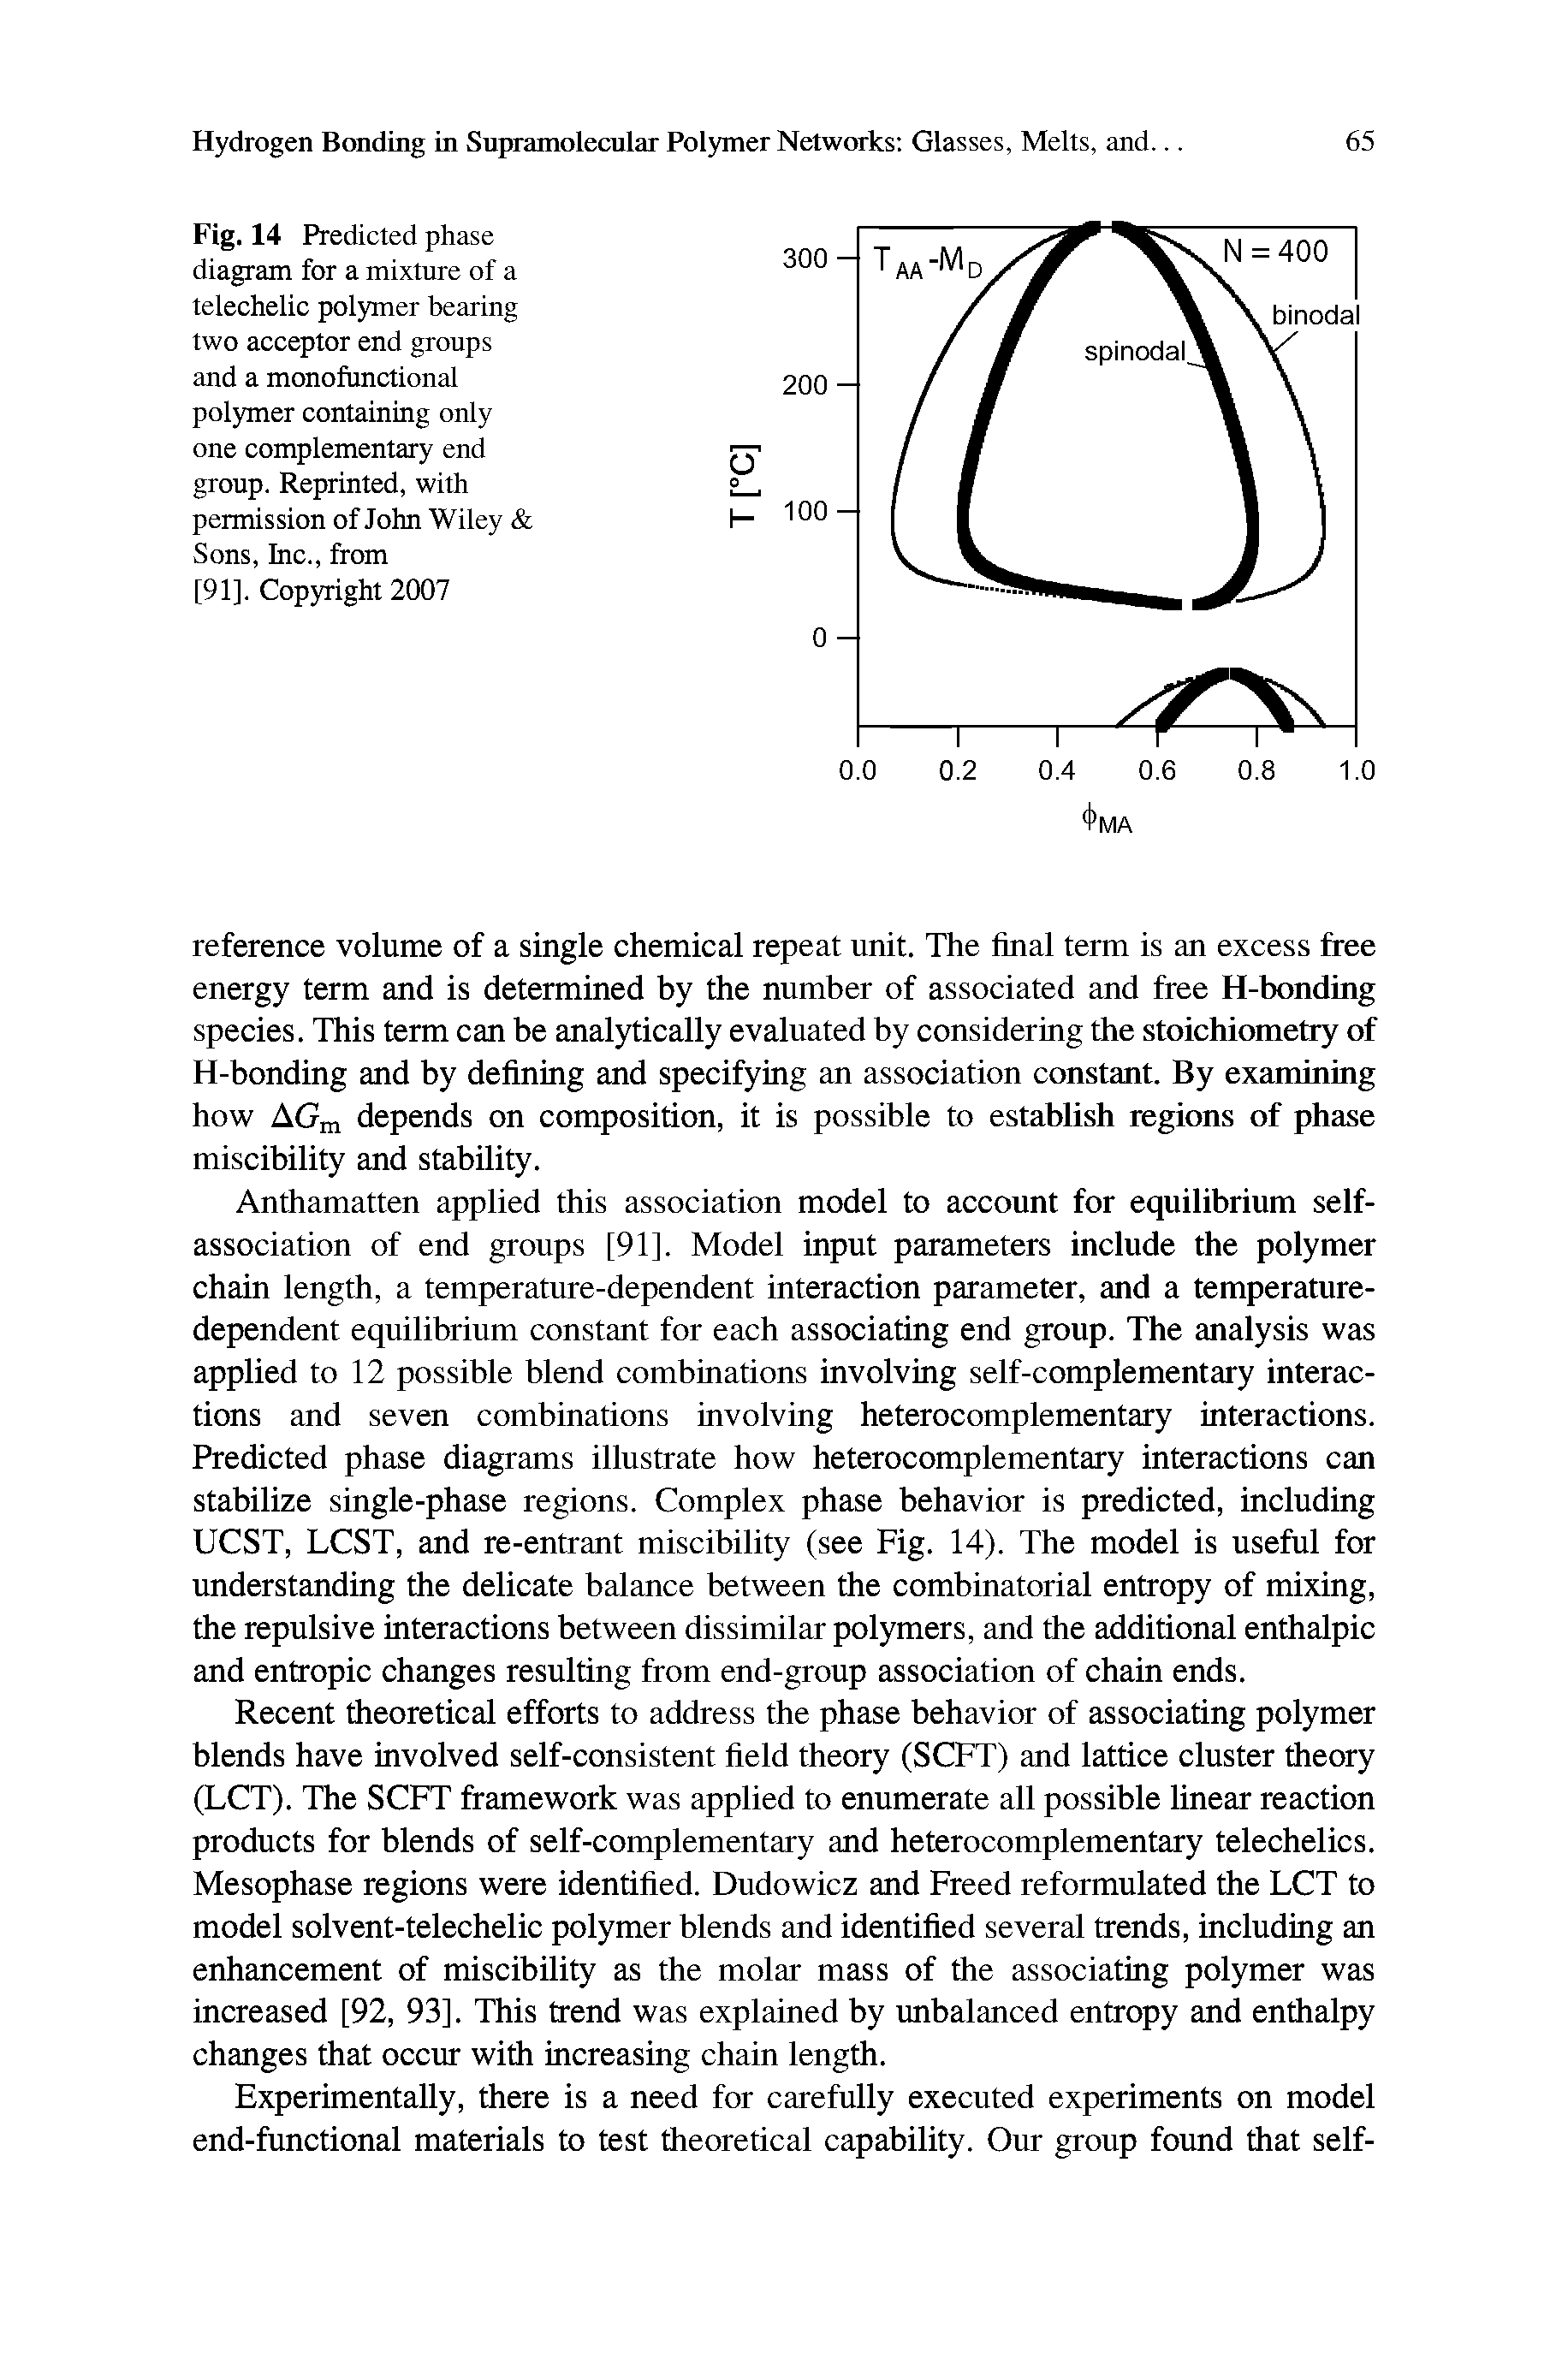 Fig. 14 Predicted phase diagram for a mixture of a telechelic polymer bearing two acceptor end groups and a monofunctional polymer containing only one complementary end group. Reprinted, with permission of John Wiley Sons, Inc., from [91], Copyright 2007...